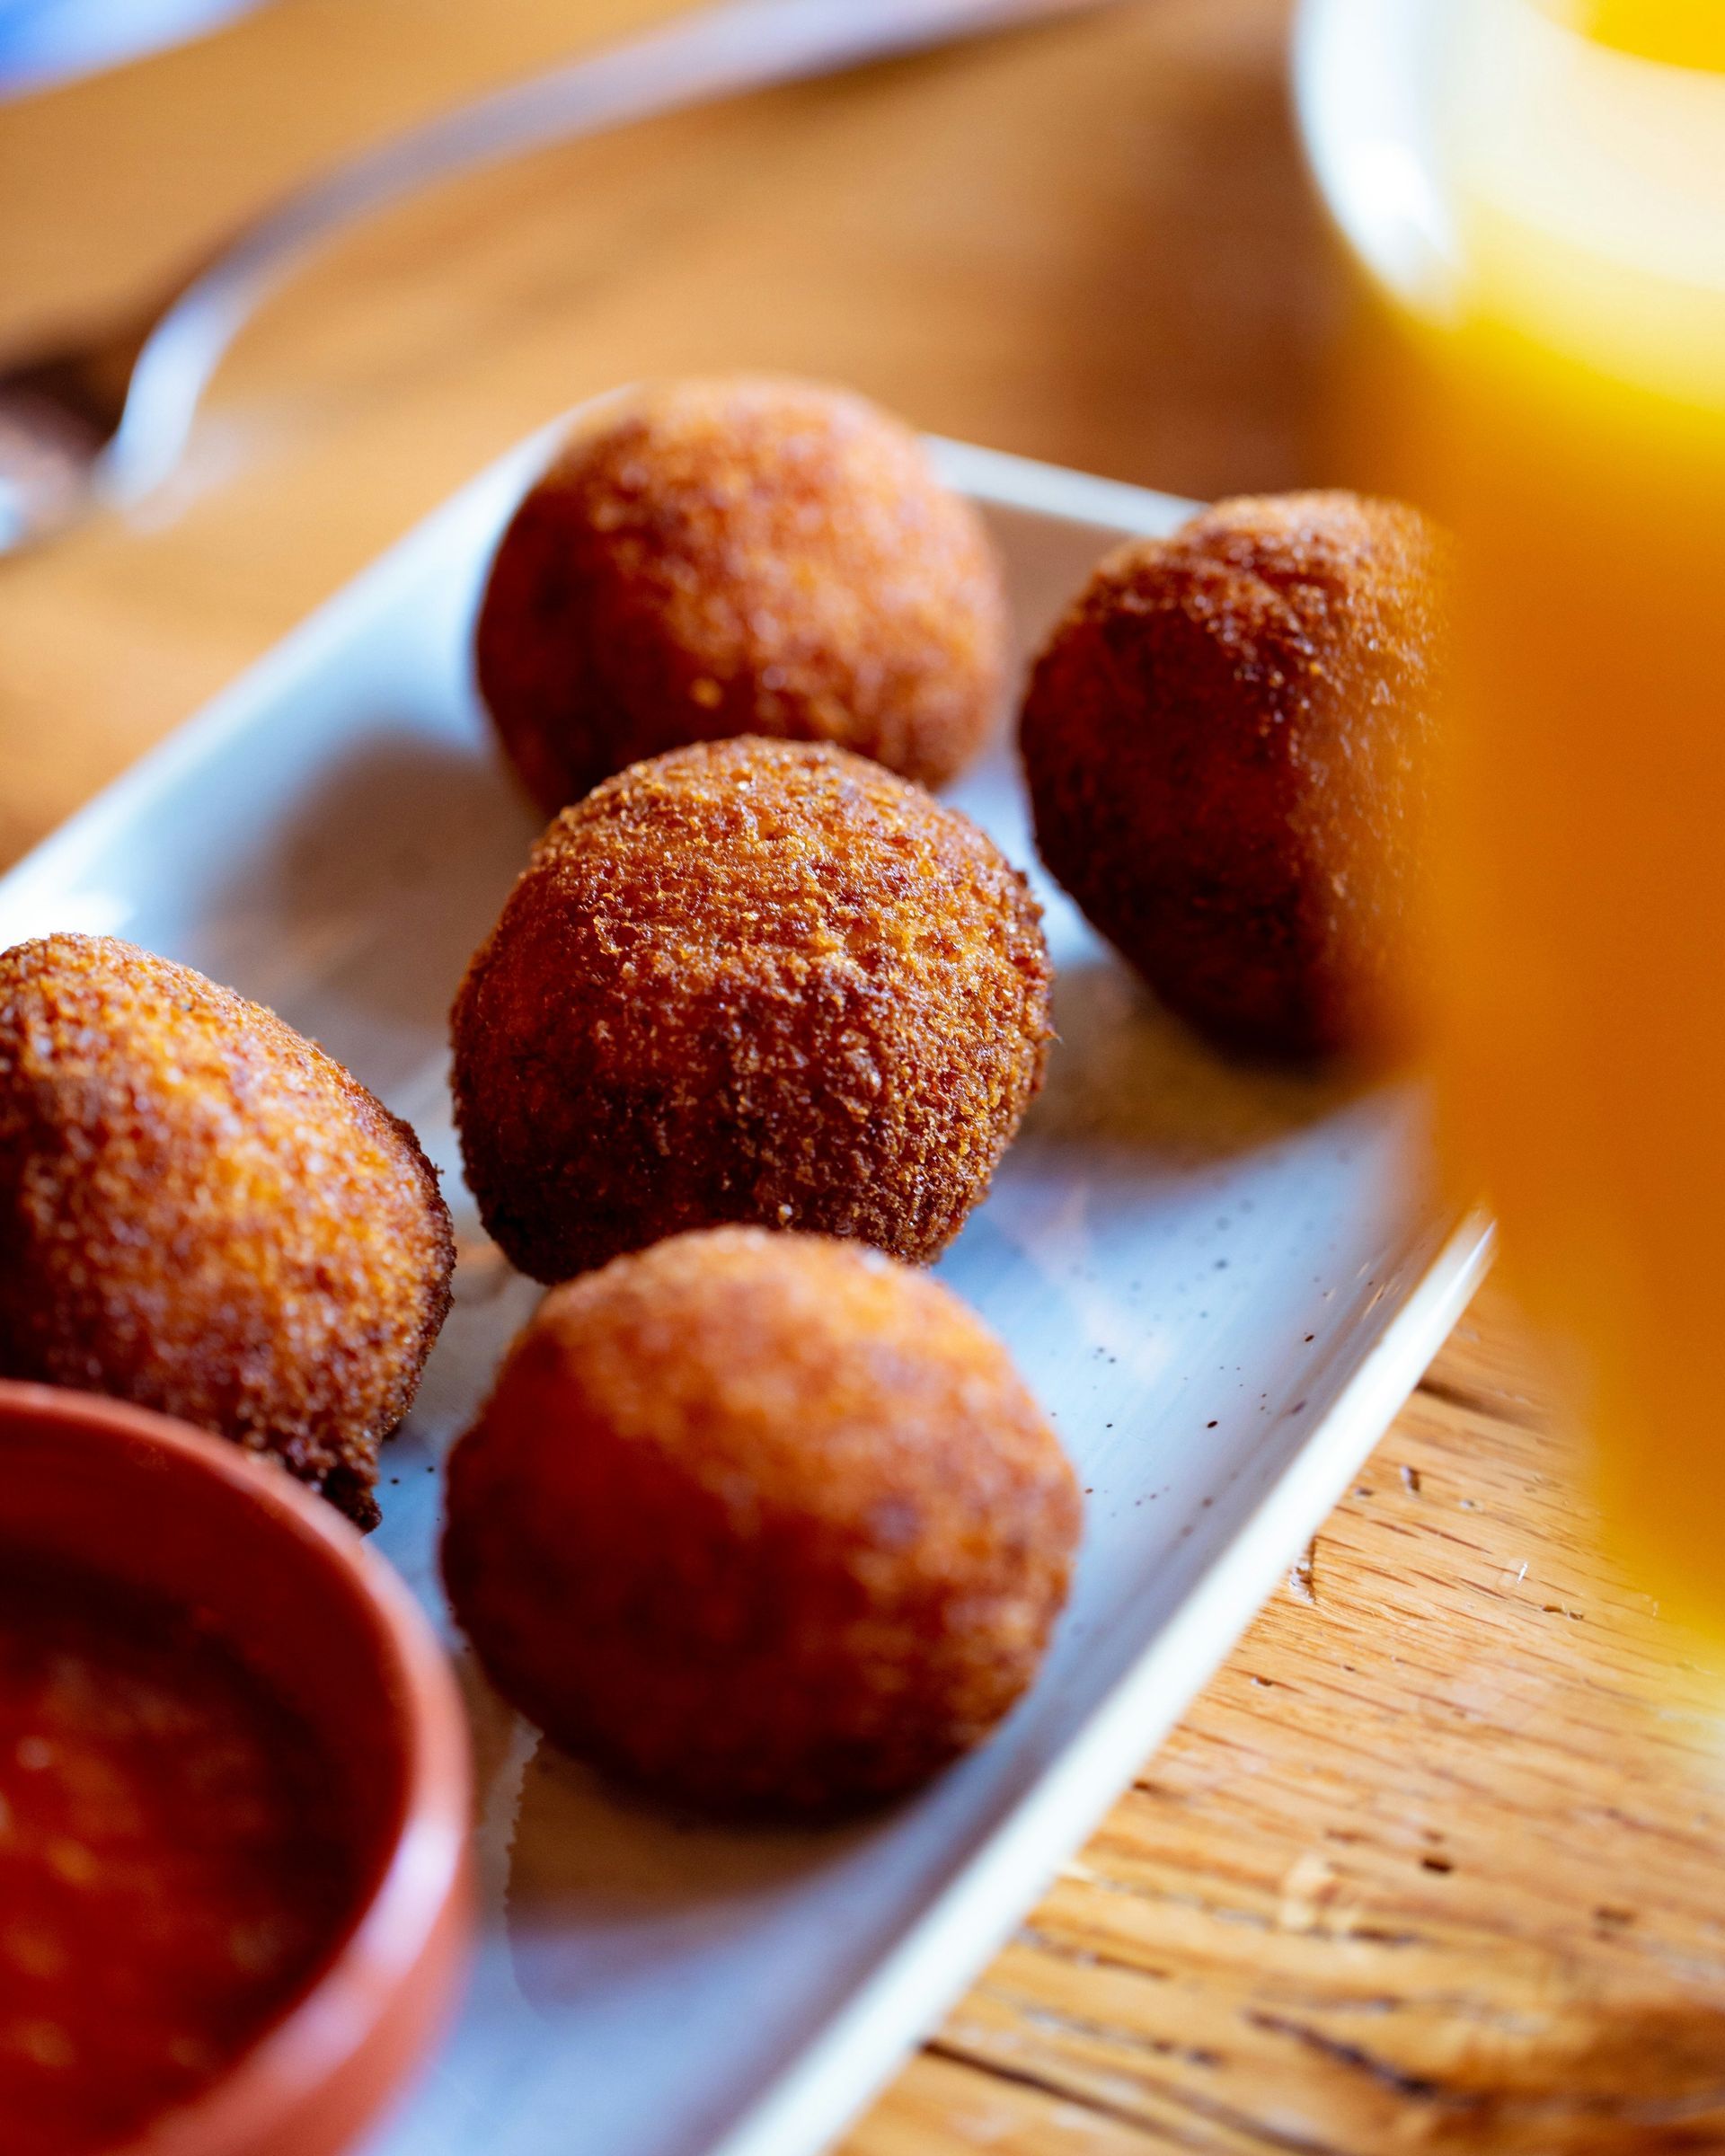 Five fried arancini rice balls served with a side of tomato sauce.